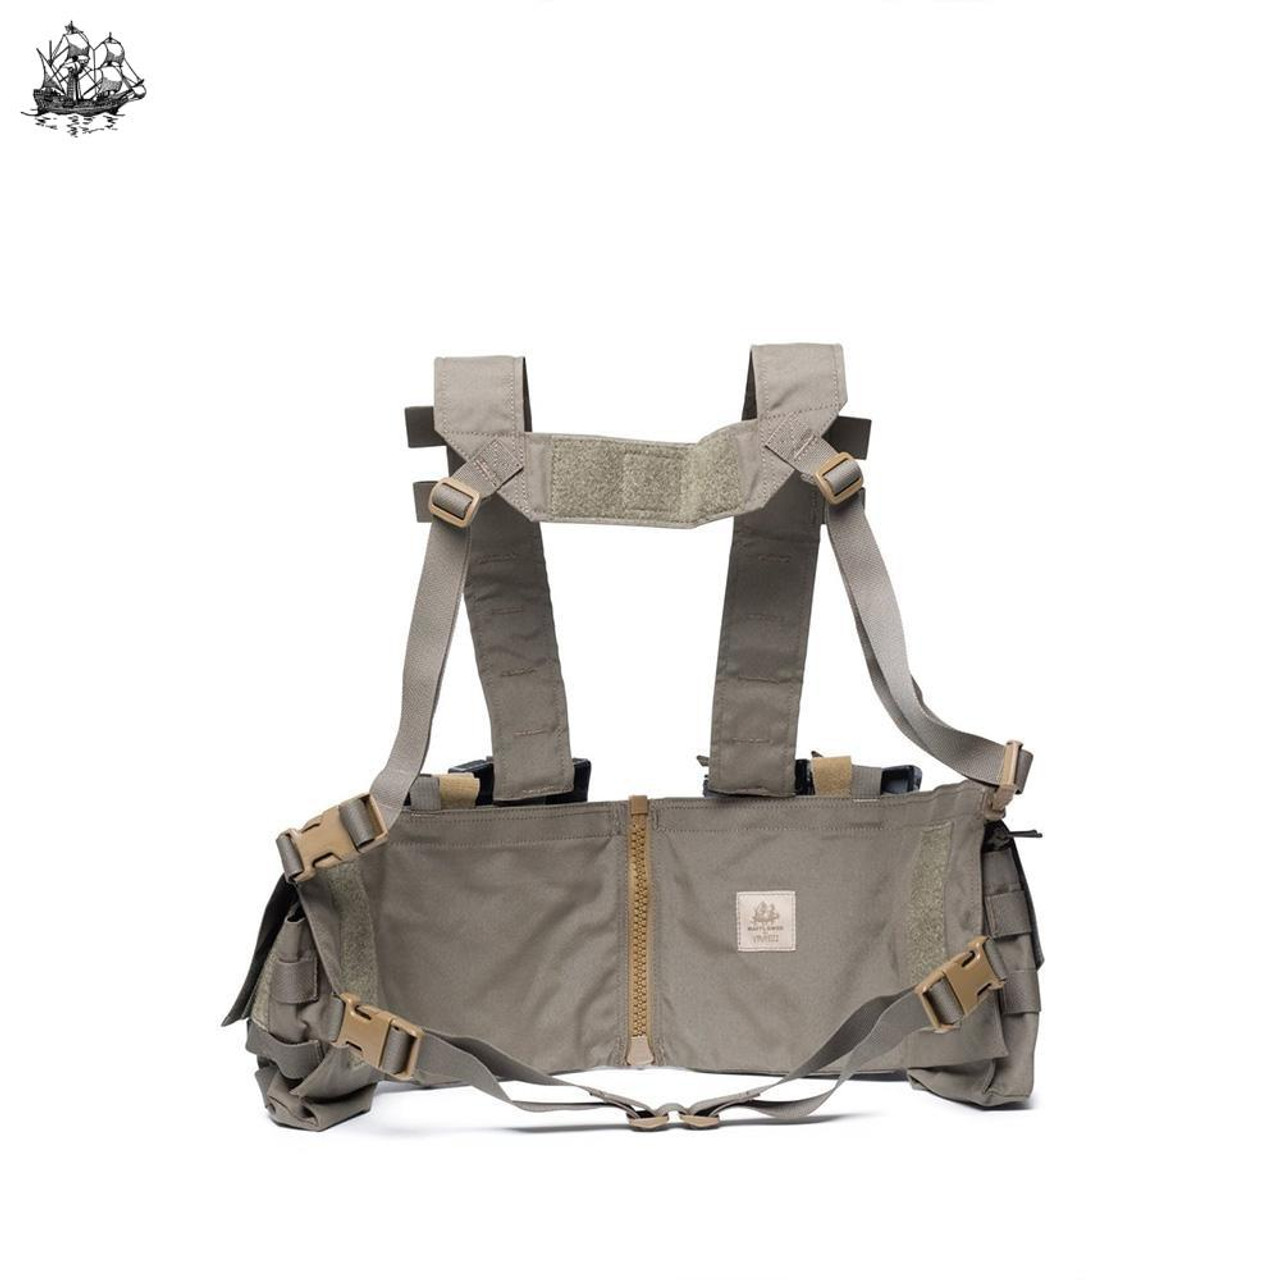 Velocity Systems Chest Rig | lupon.gov.ph